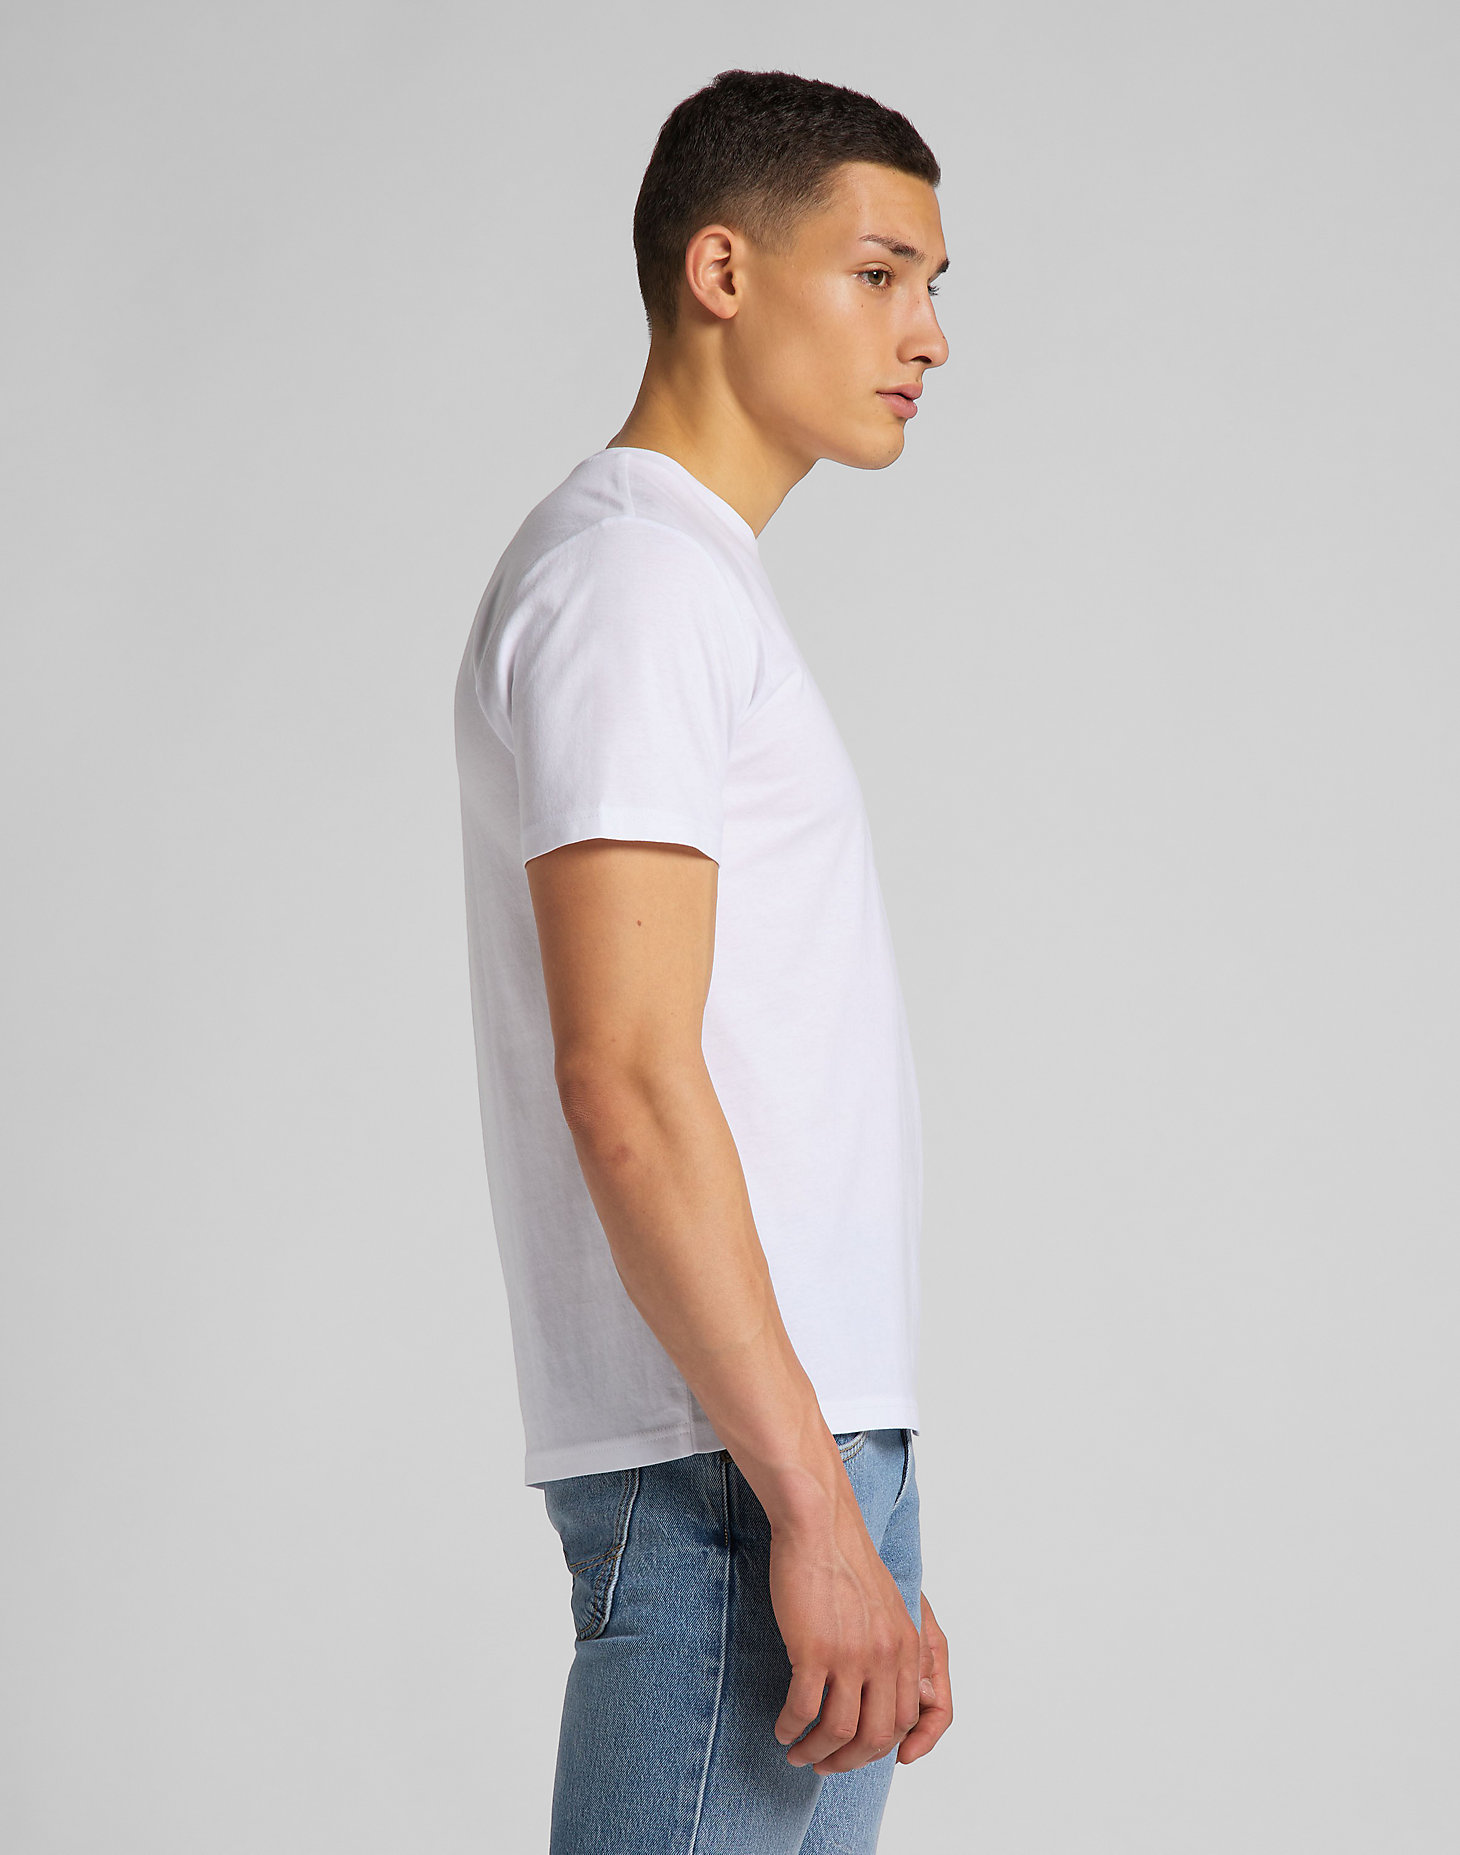 Patch Logo Tee in White alternative view 1